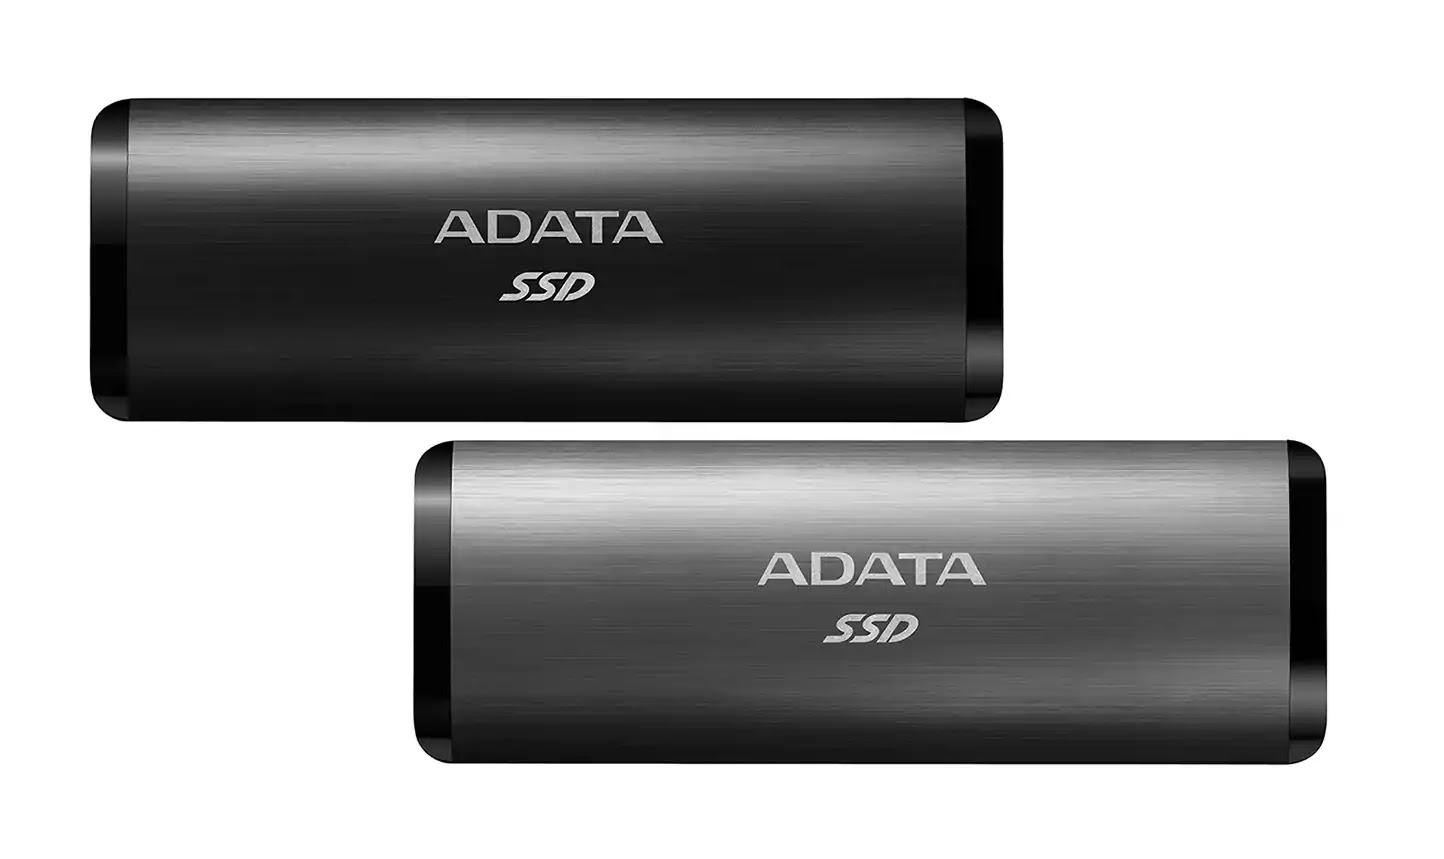 ADATA SE760 External Solid State Drive